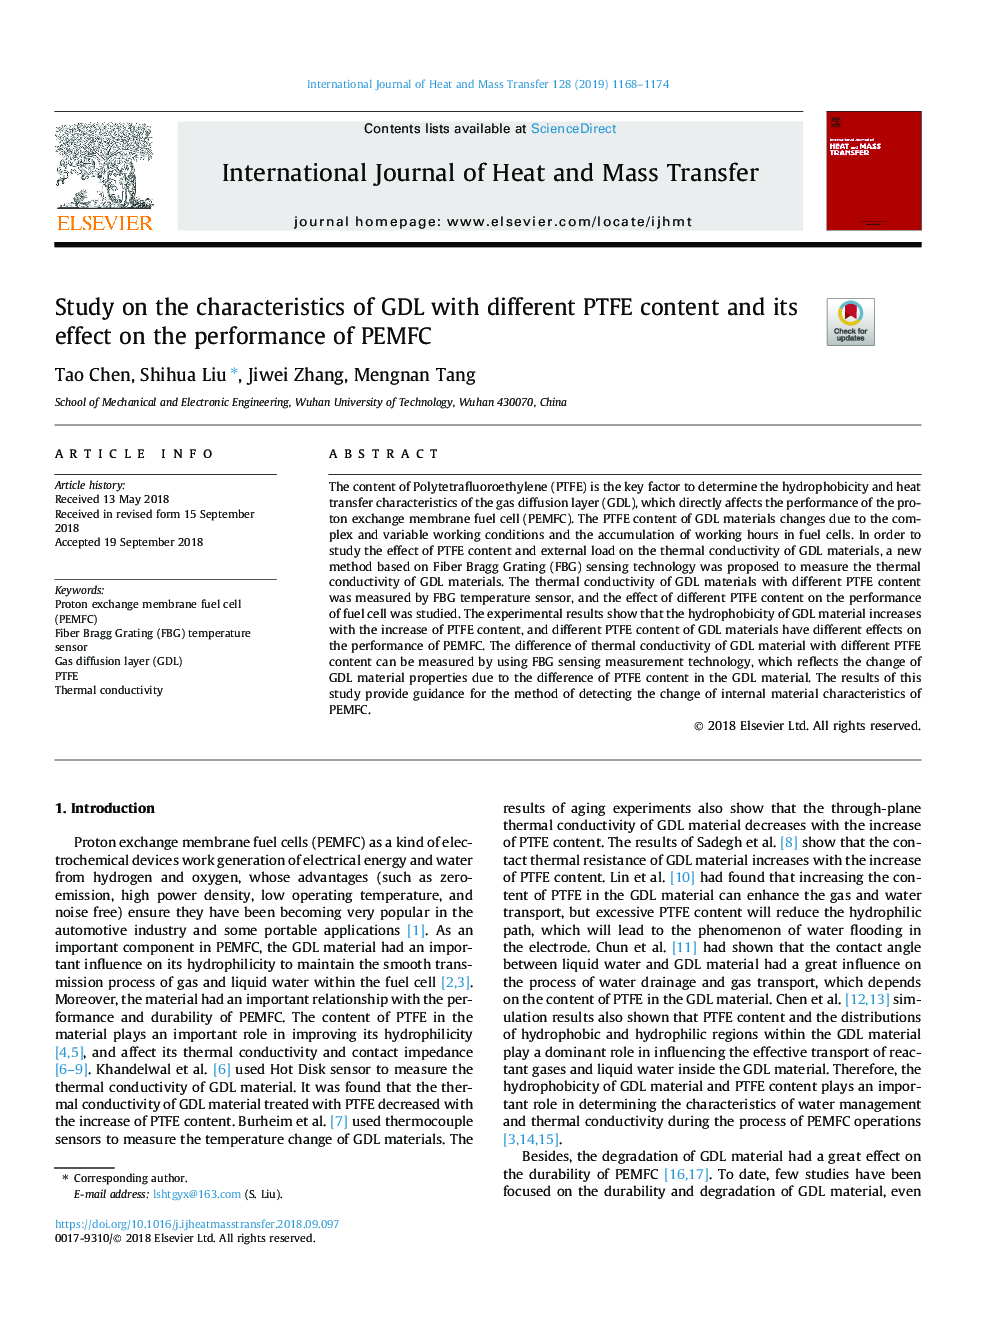 Study on the characteristics of GDL with different PTFE content and its effect on the performance of PEMFC